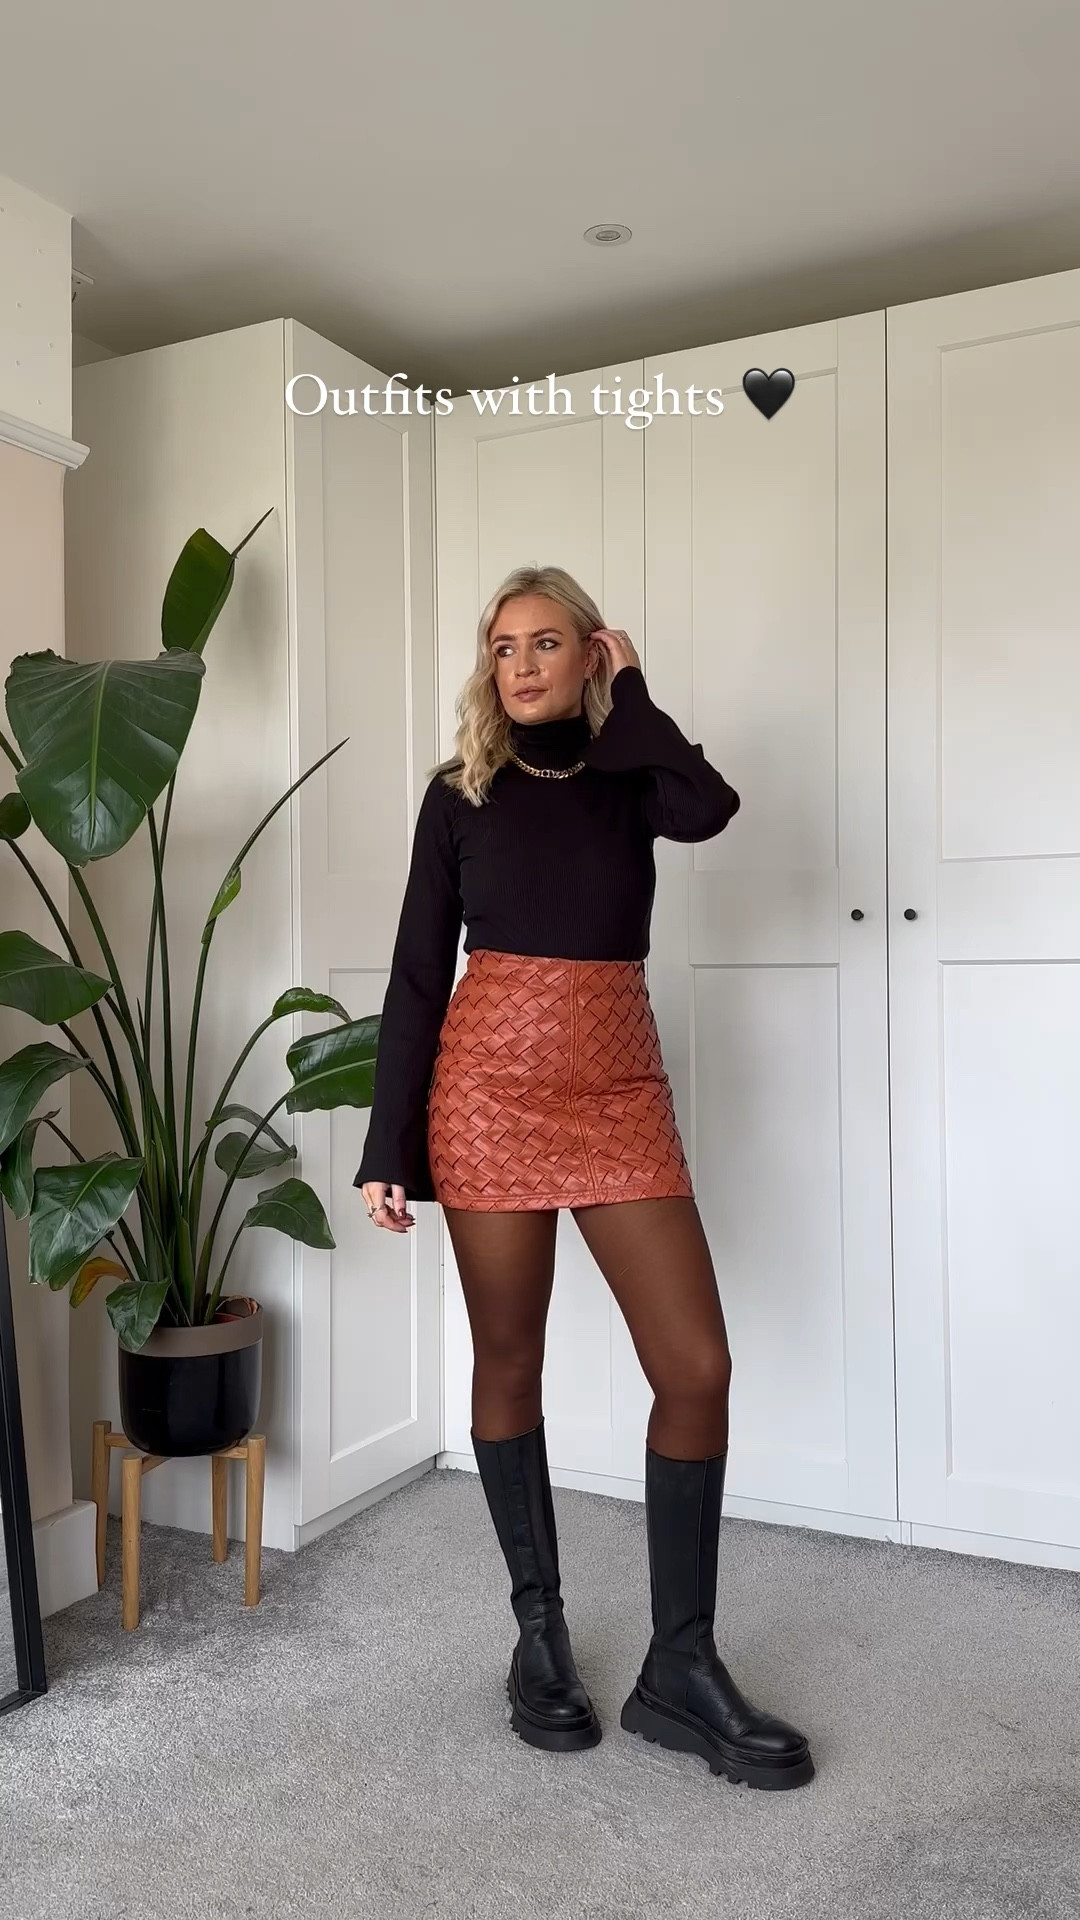 OOTD - Mini Skirts and Crop Tops! - oh hey, pretty